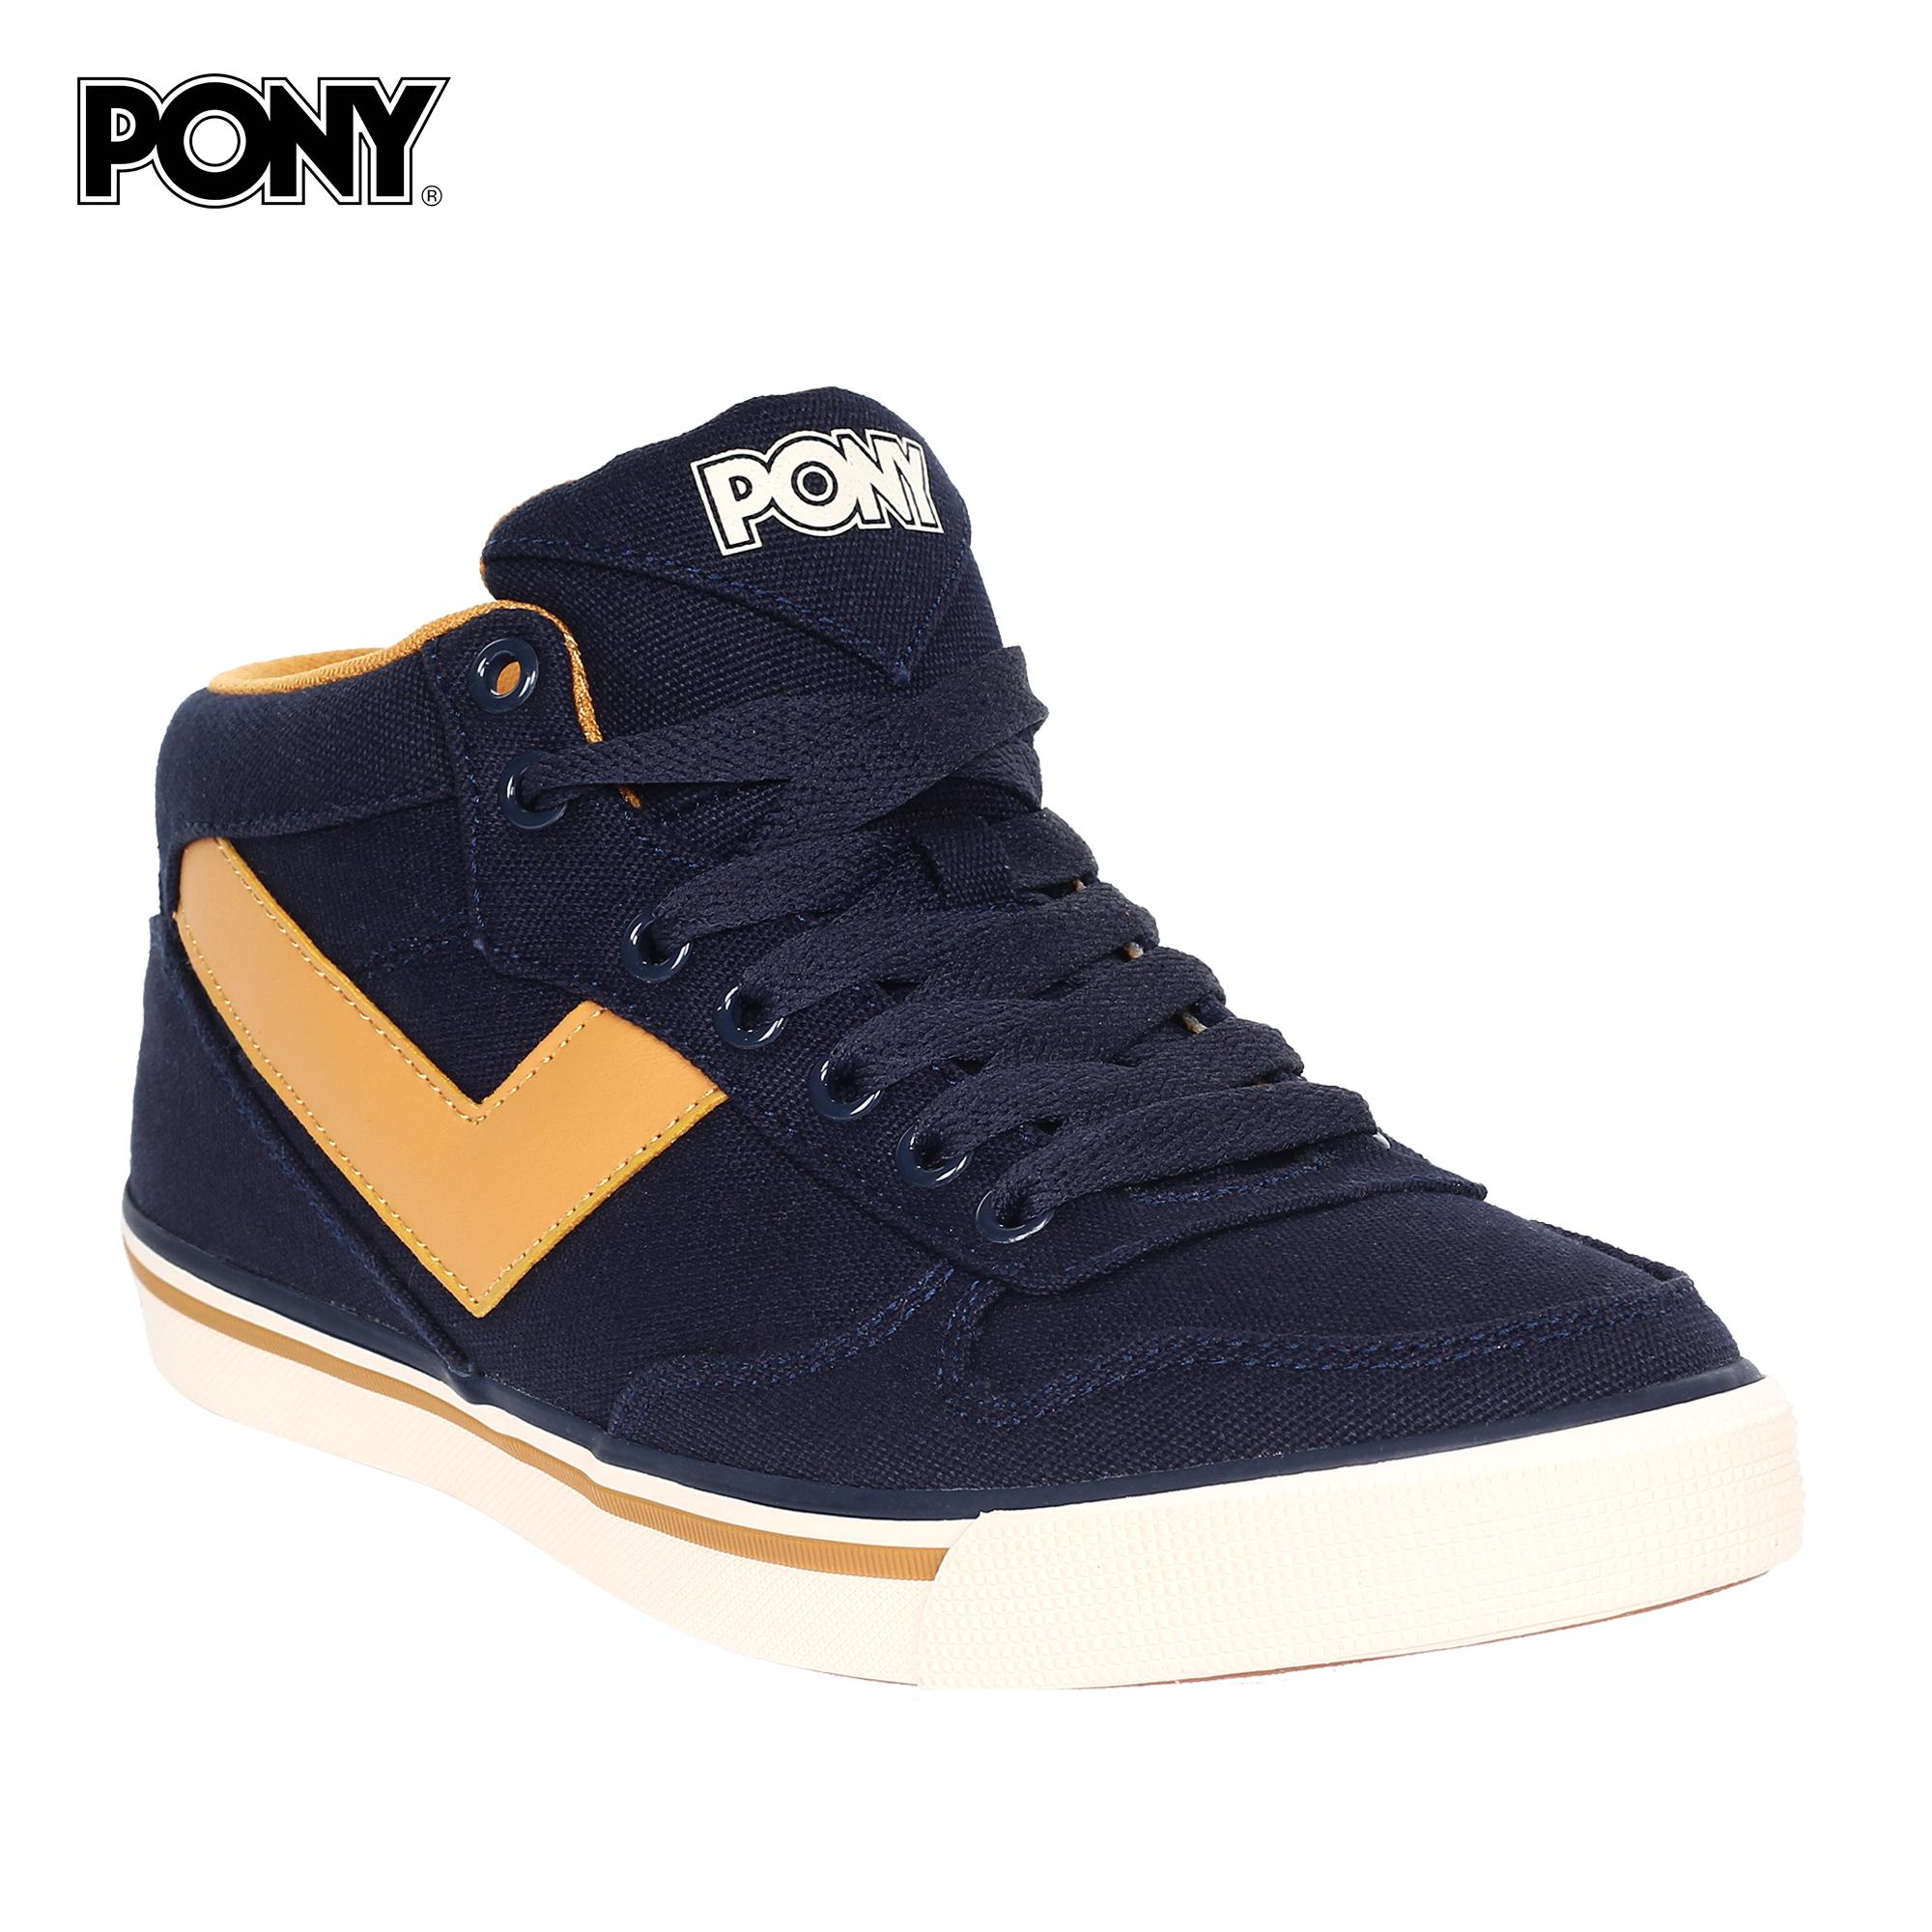 pony high cut shoes price